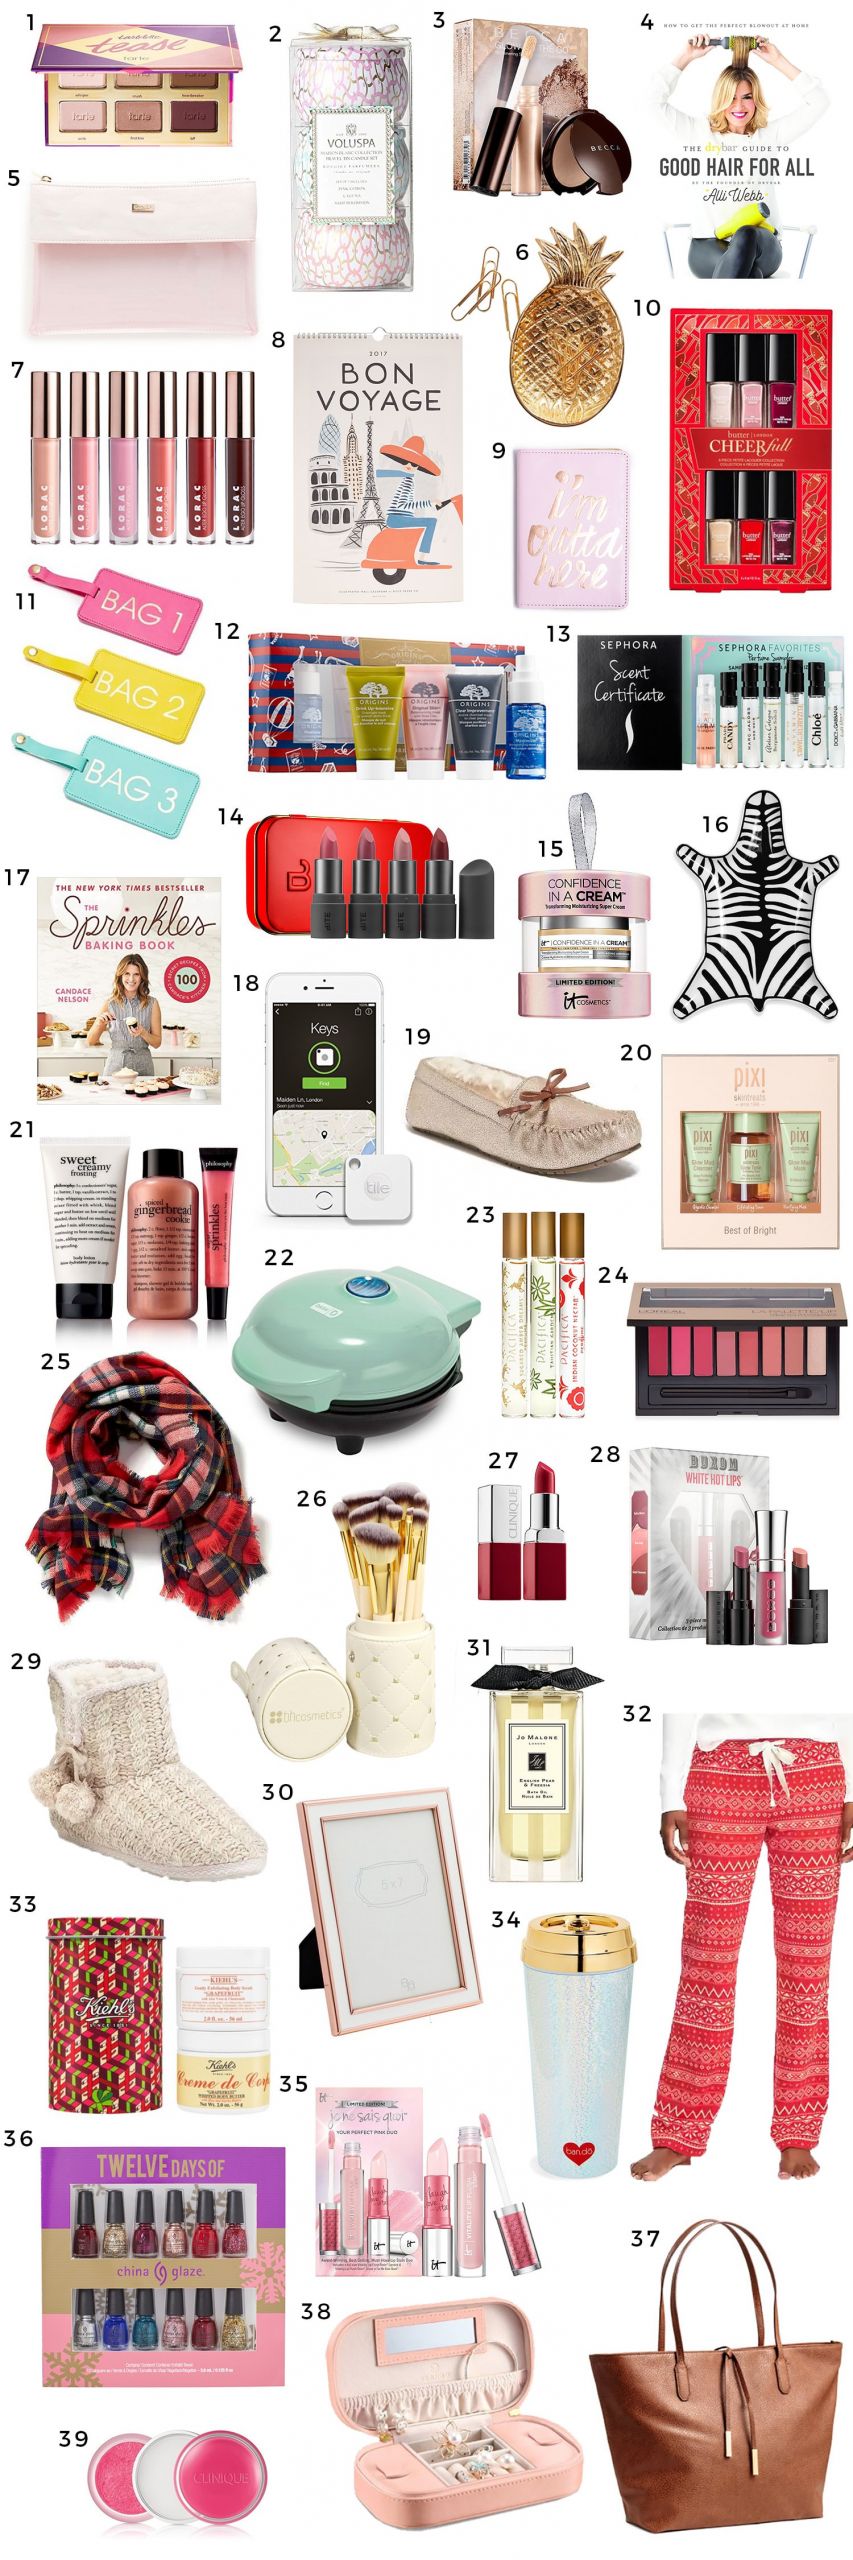 Best Holiday Gift Ideas
 The Best Christmas Gift Ideas for Women under $25